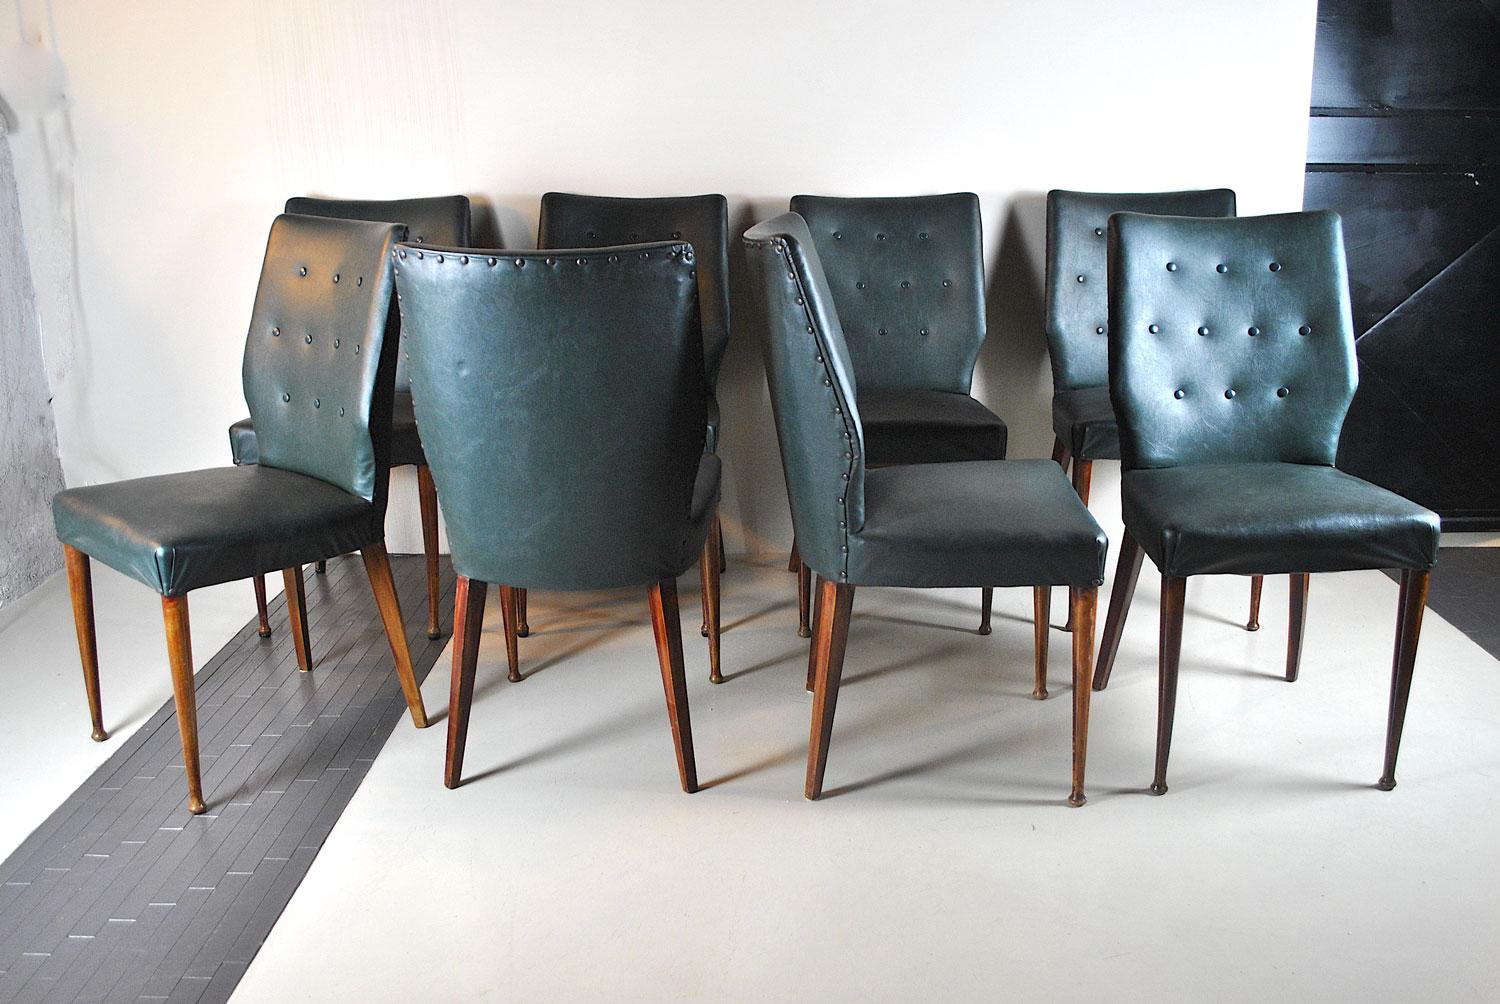 Italian Midcentury Set of Eighty 1960s Chairs in Green Faux Leather For Sale 1